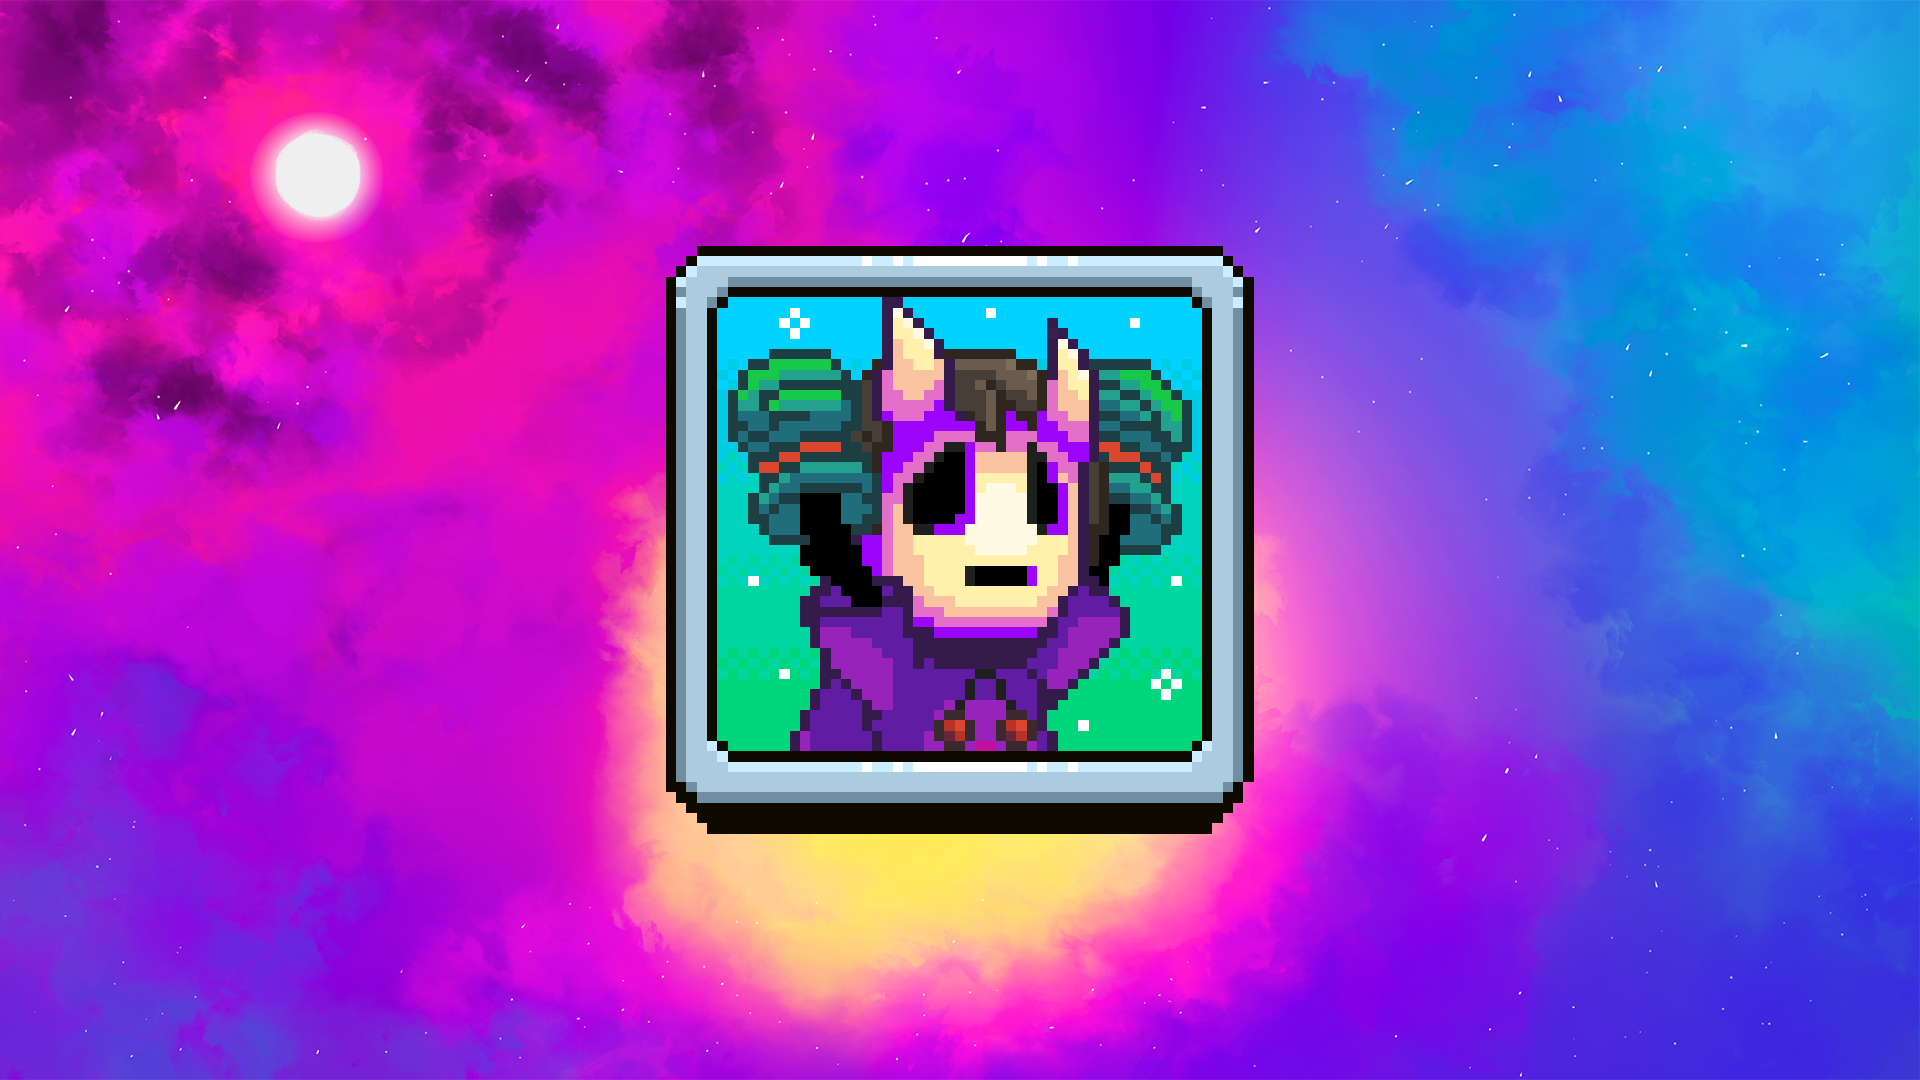 Icon for Employee of the Month!